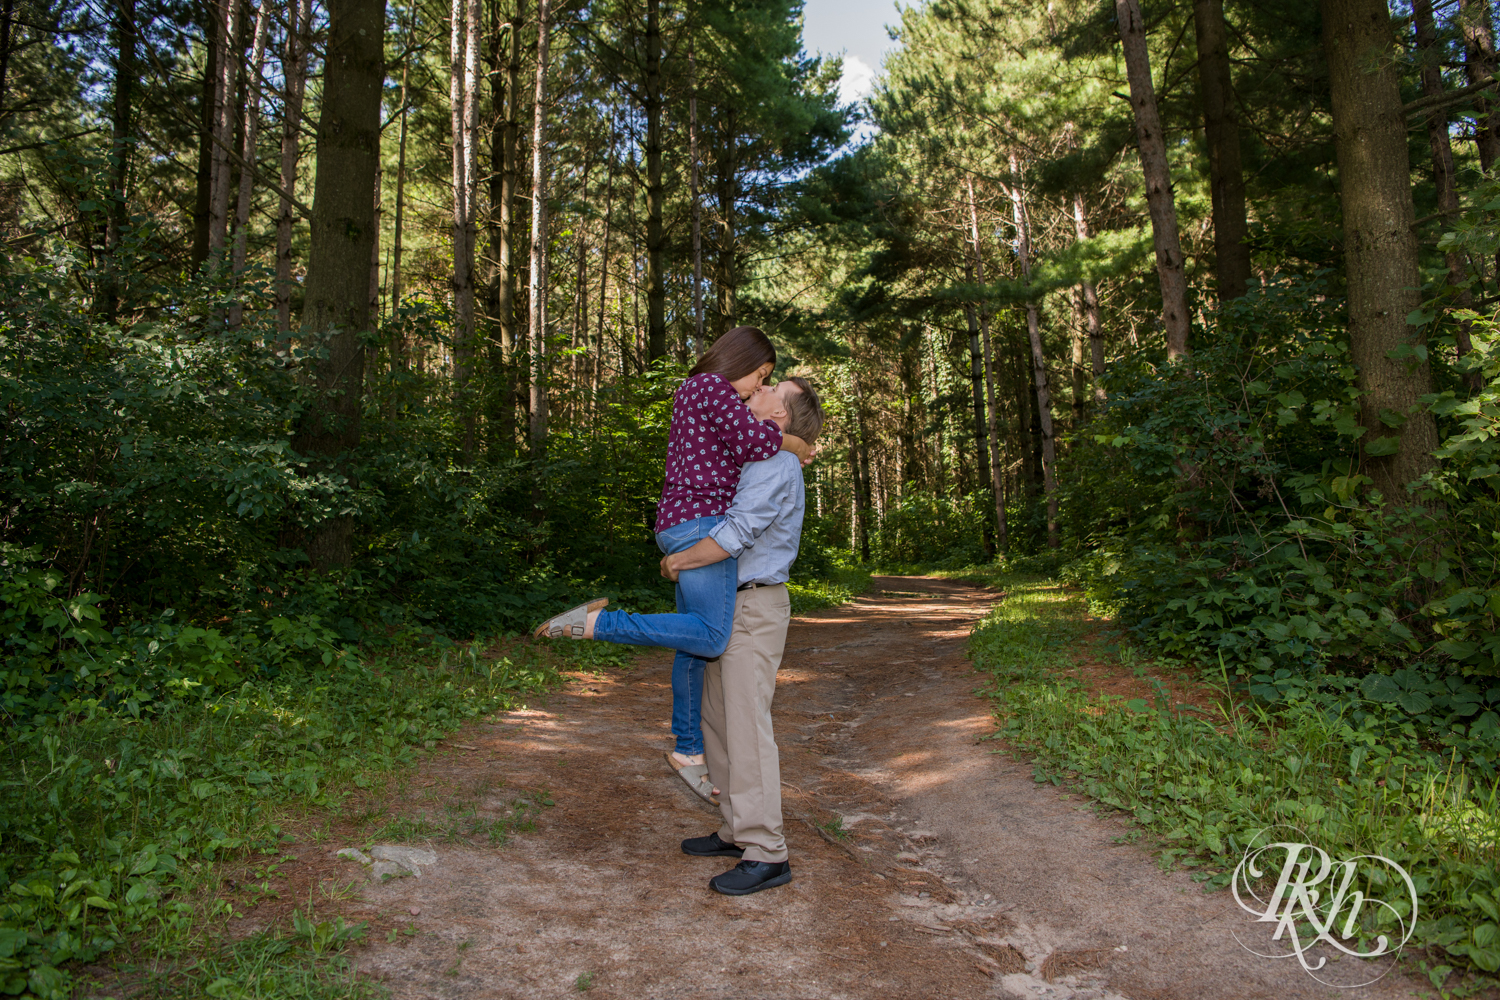 Man and woman kiss in the woods at Lebanon Hills Regional Park in Eagan, Minnesota.